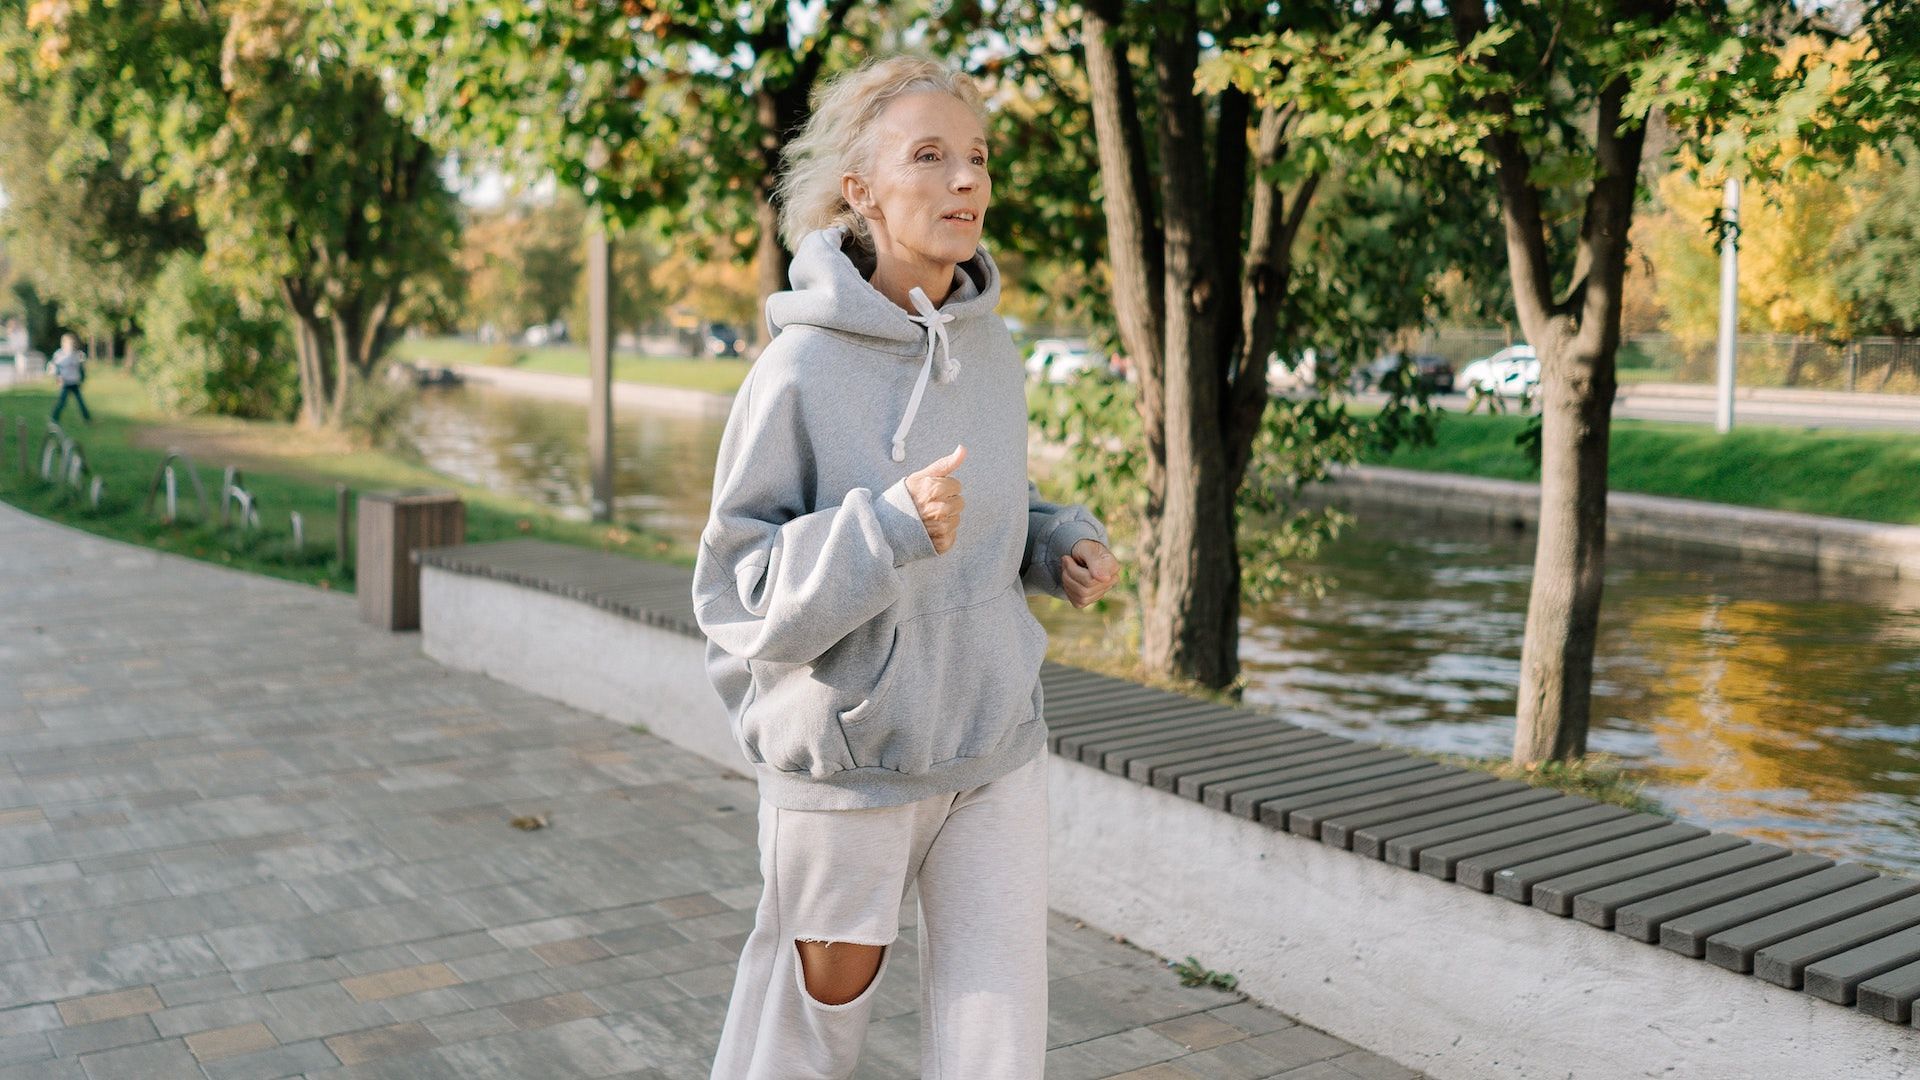 There&#039;s lots of ways for senior adults to stay fit. Image via Pexels/Cottonbro